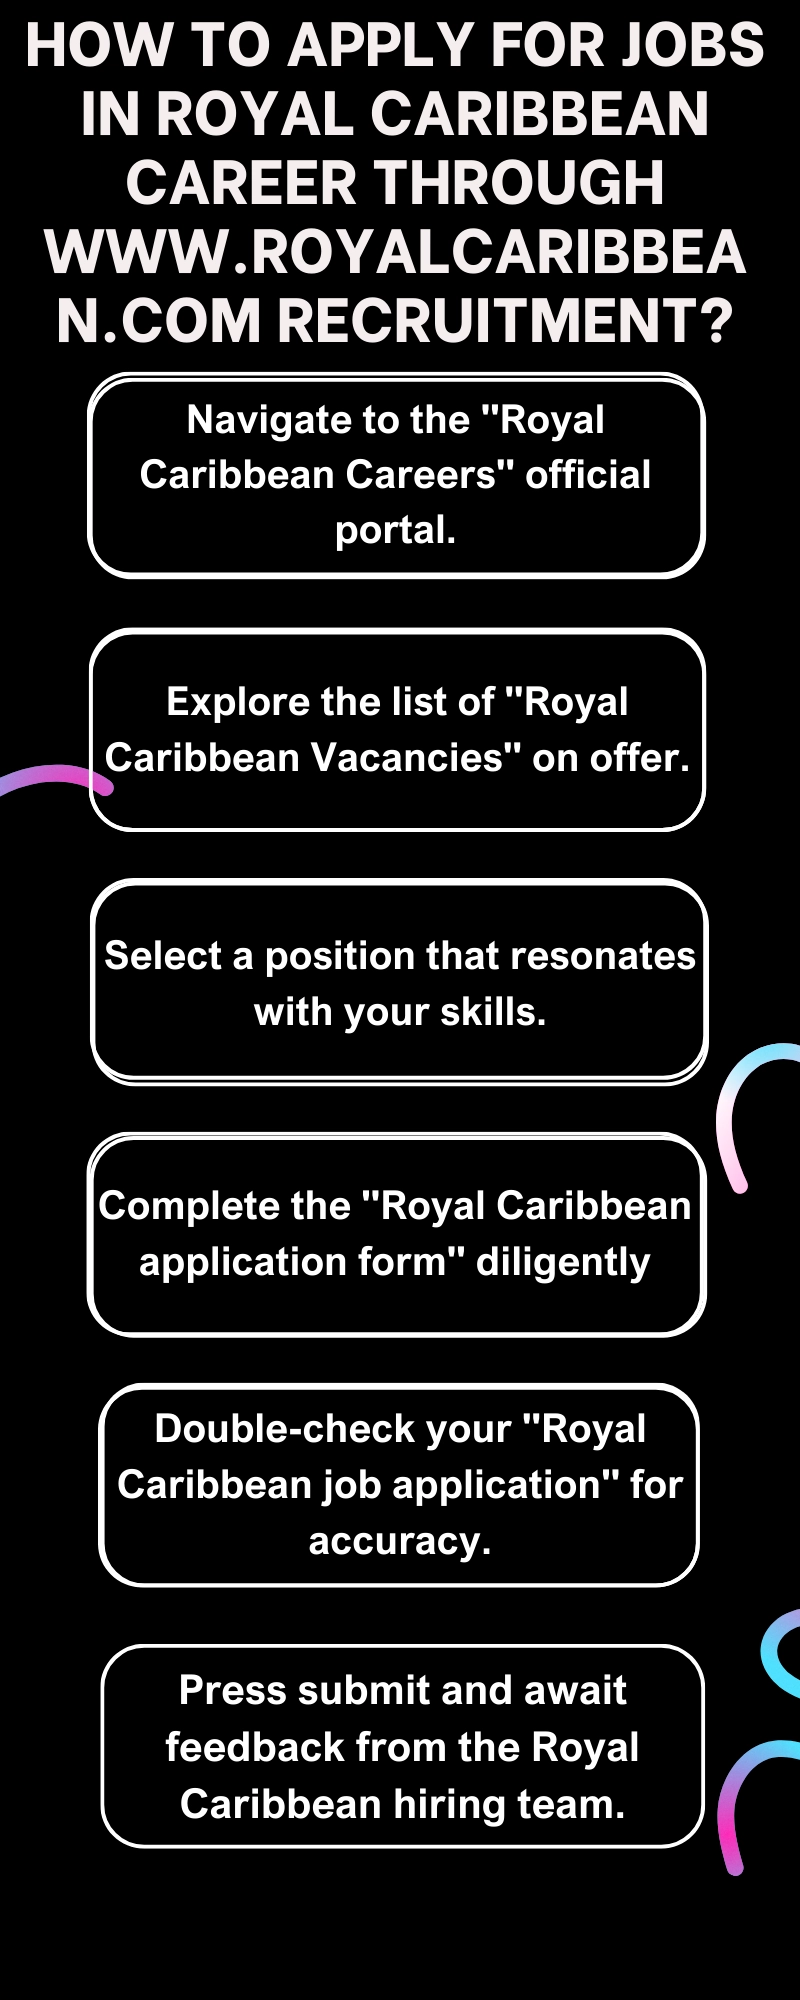 How to Apply for Jobs in Royal Caribbean Career through www.royalcaribbean.com recruitment?